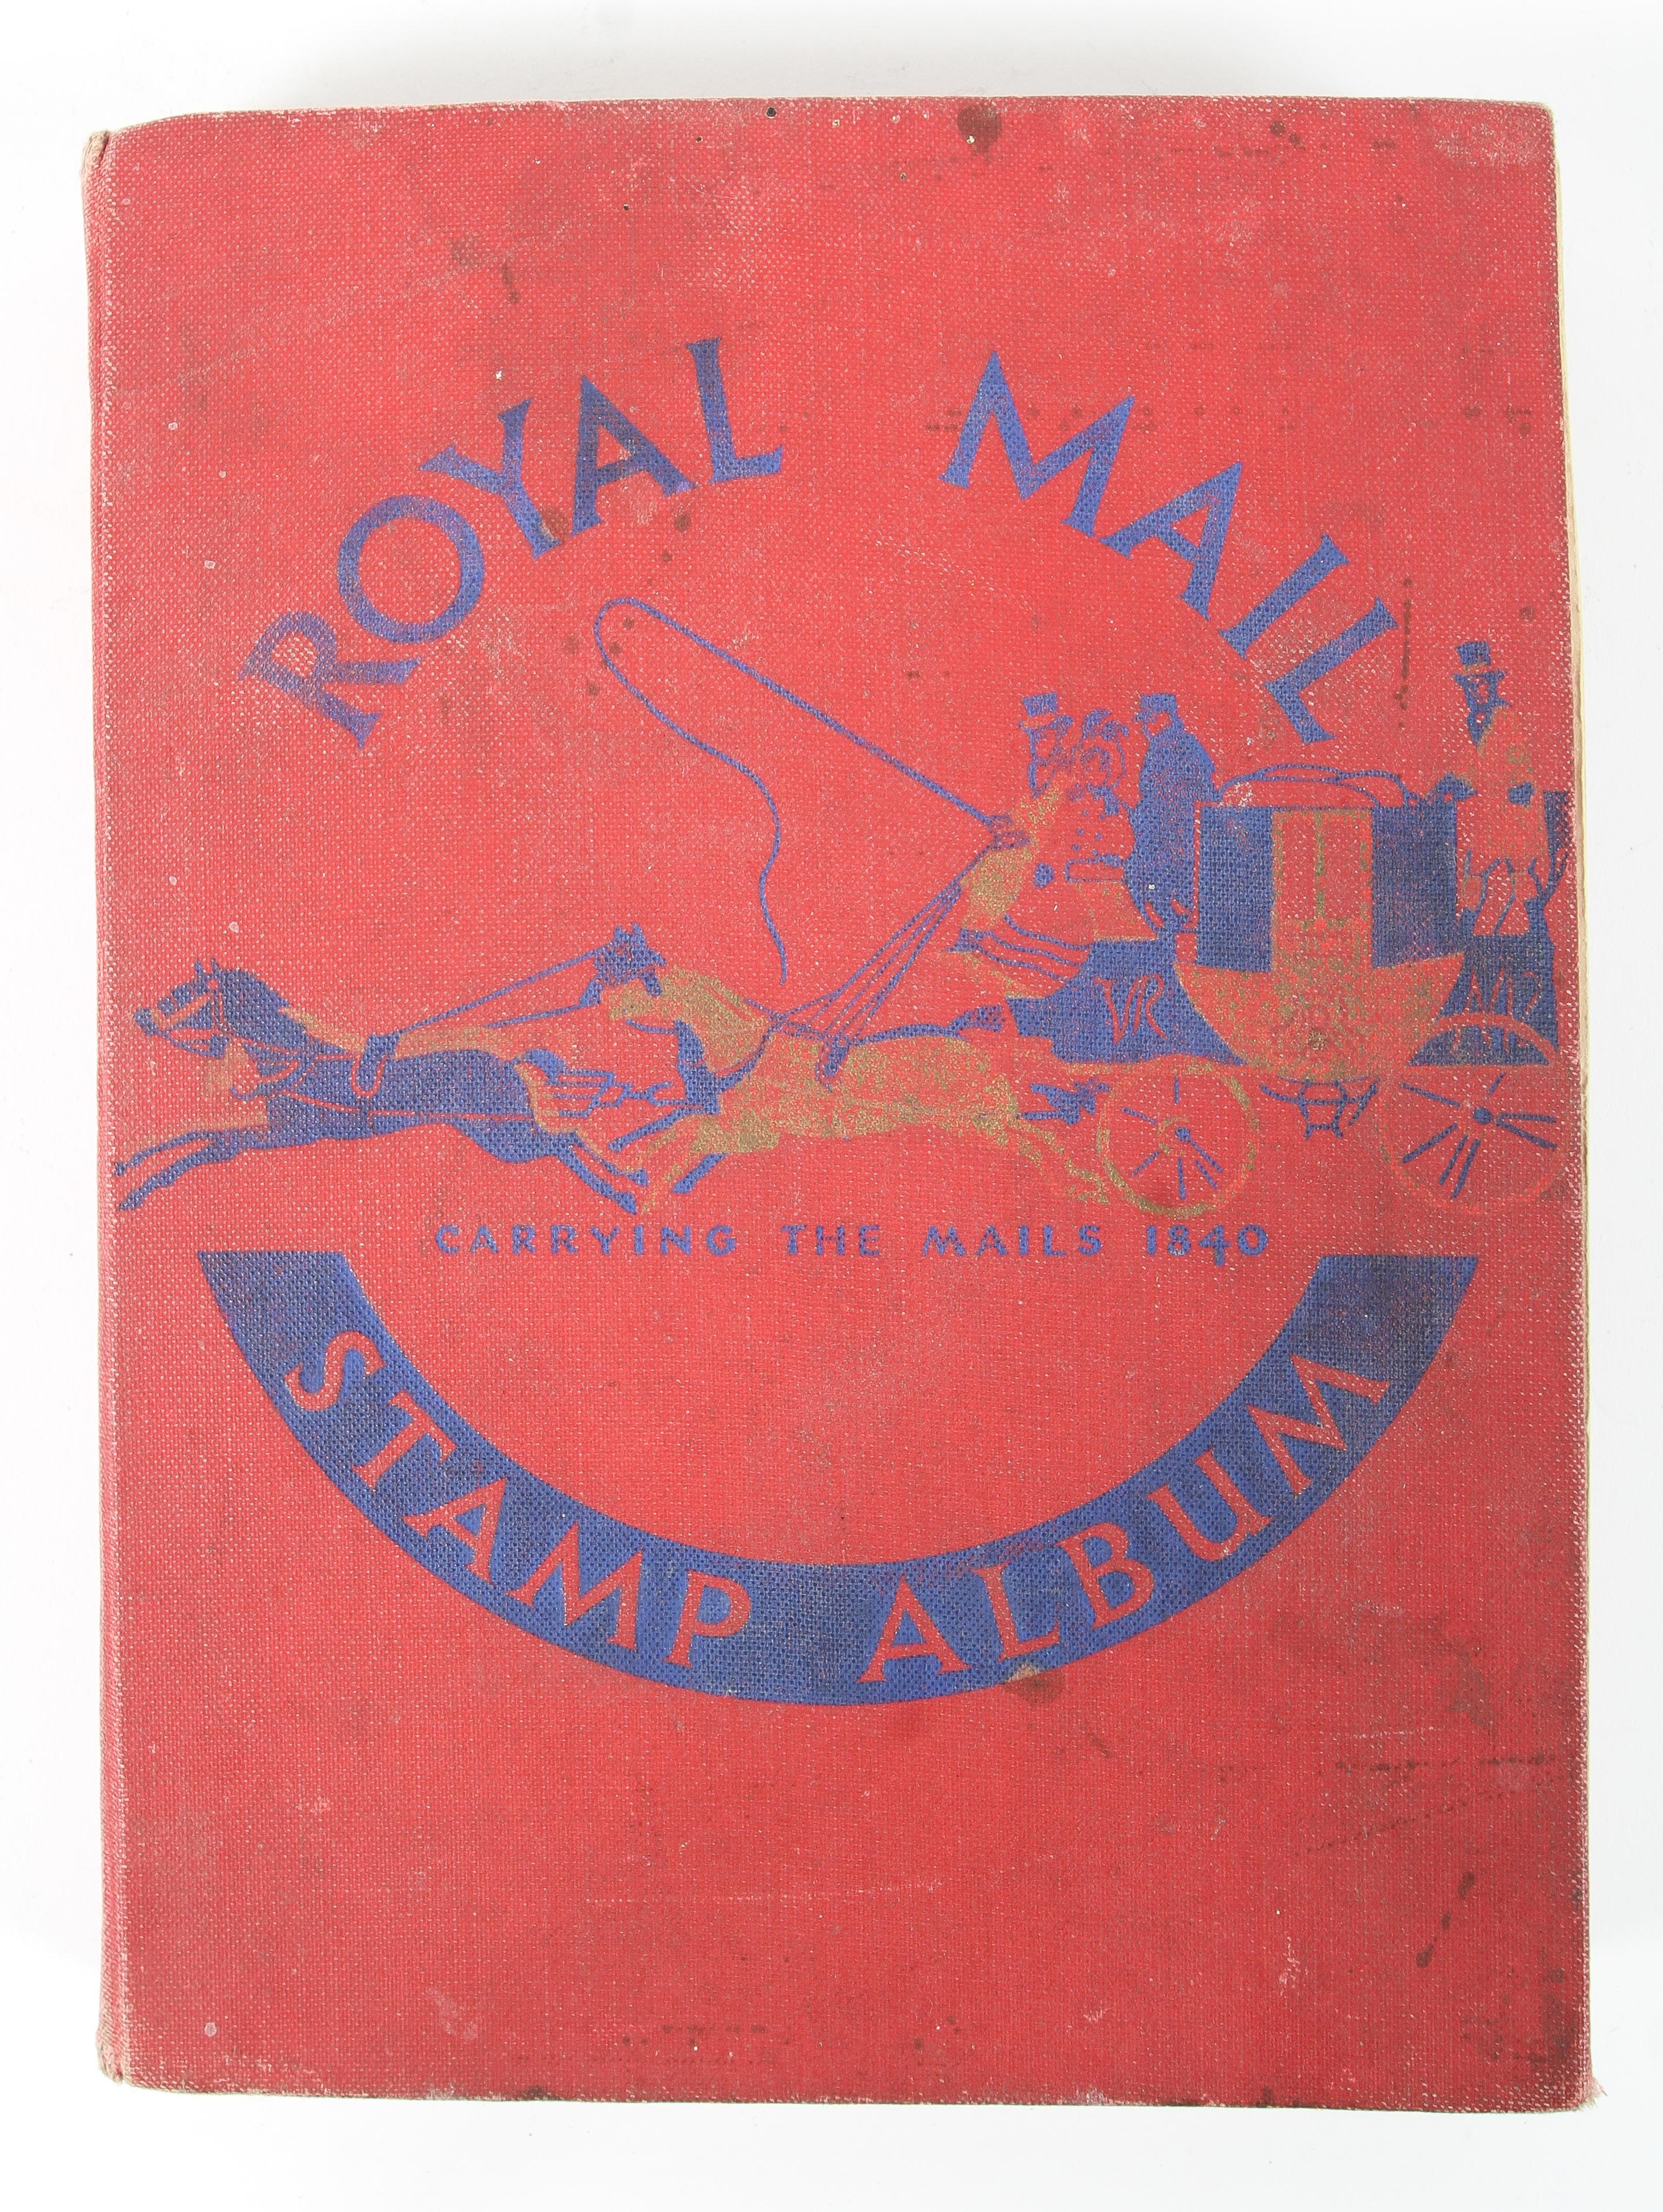 A Royal Mail stamp album containing UK and World stamps and a folder containing selections of First